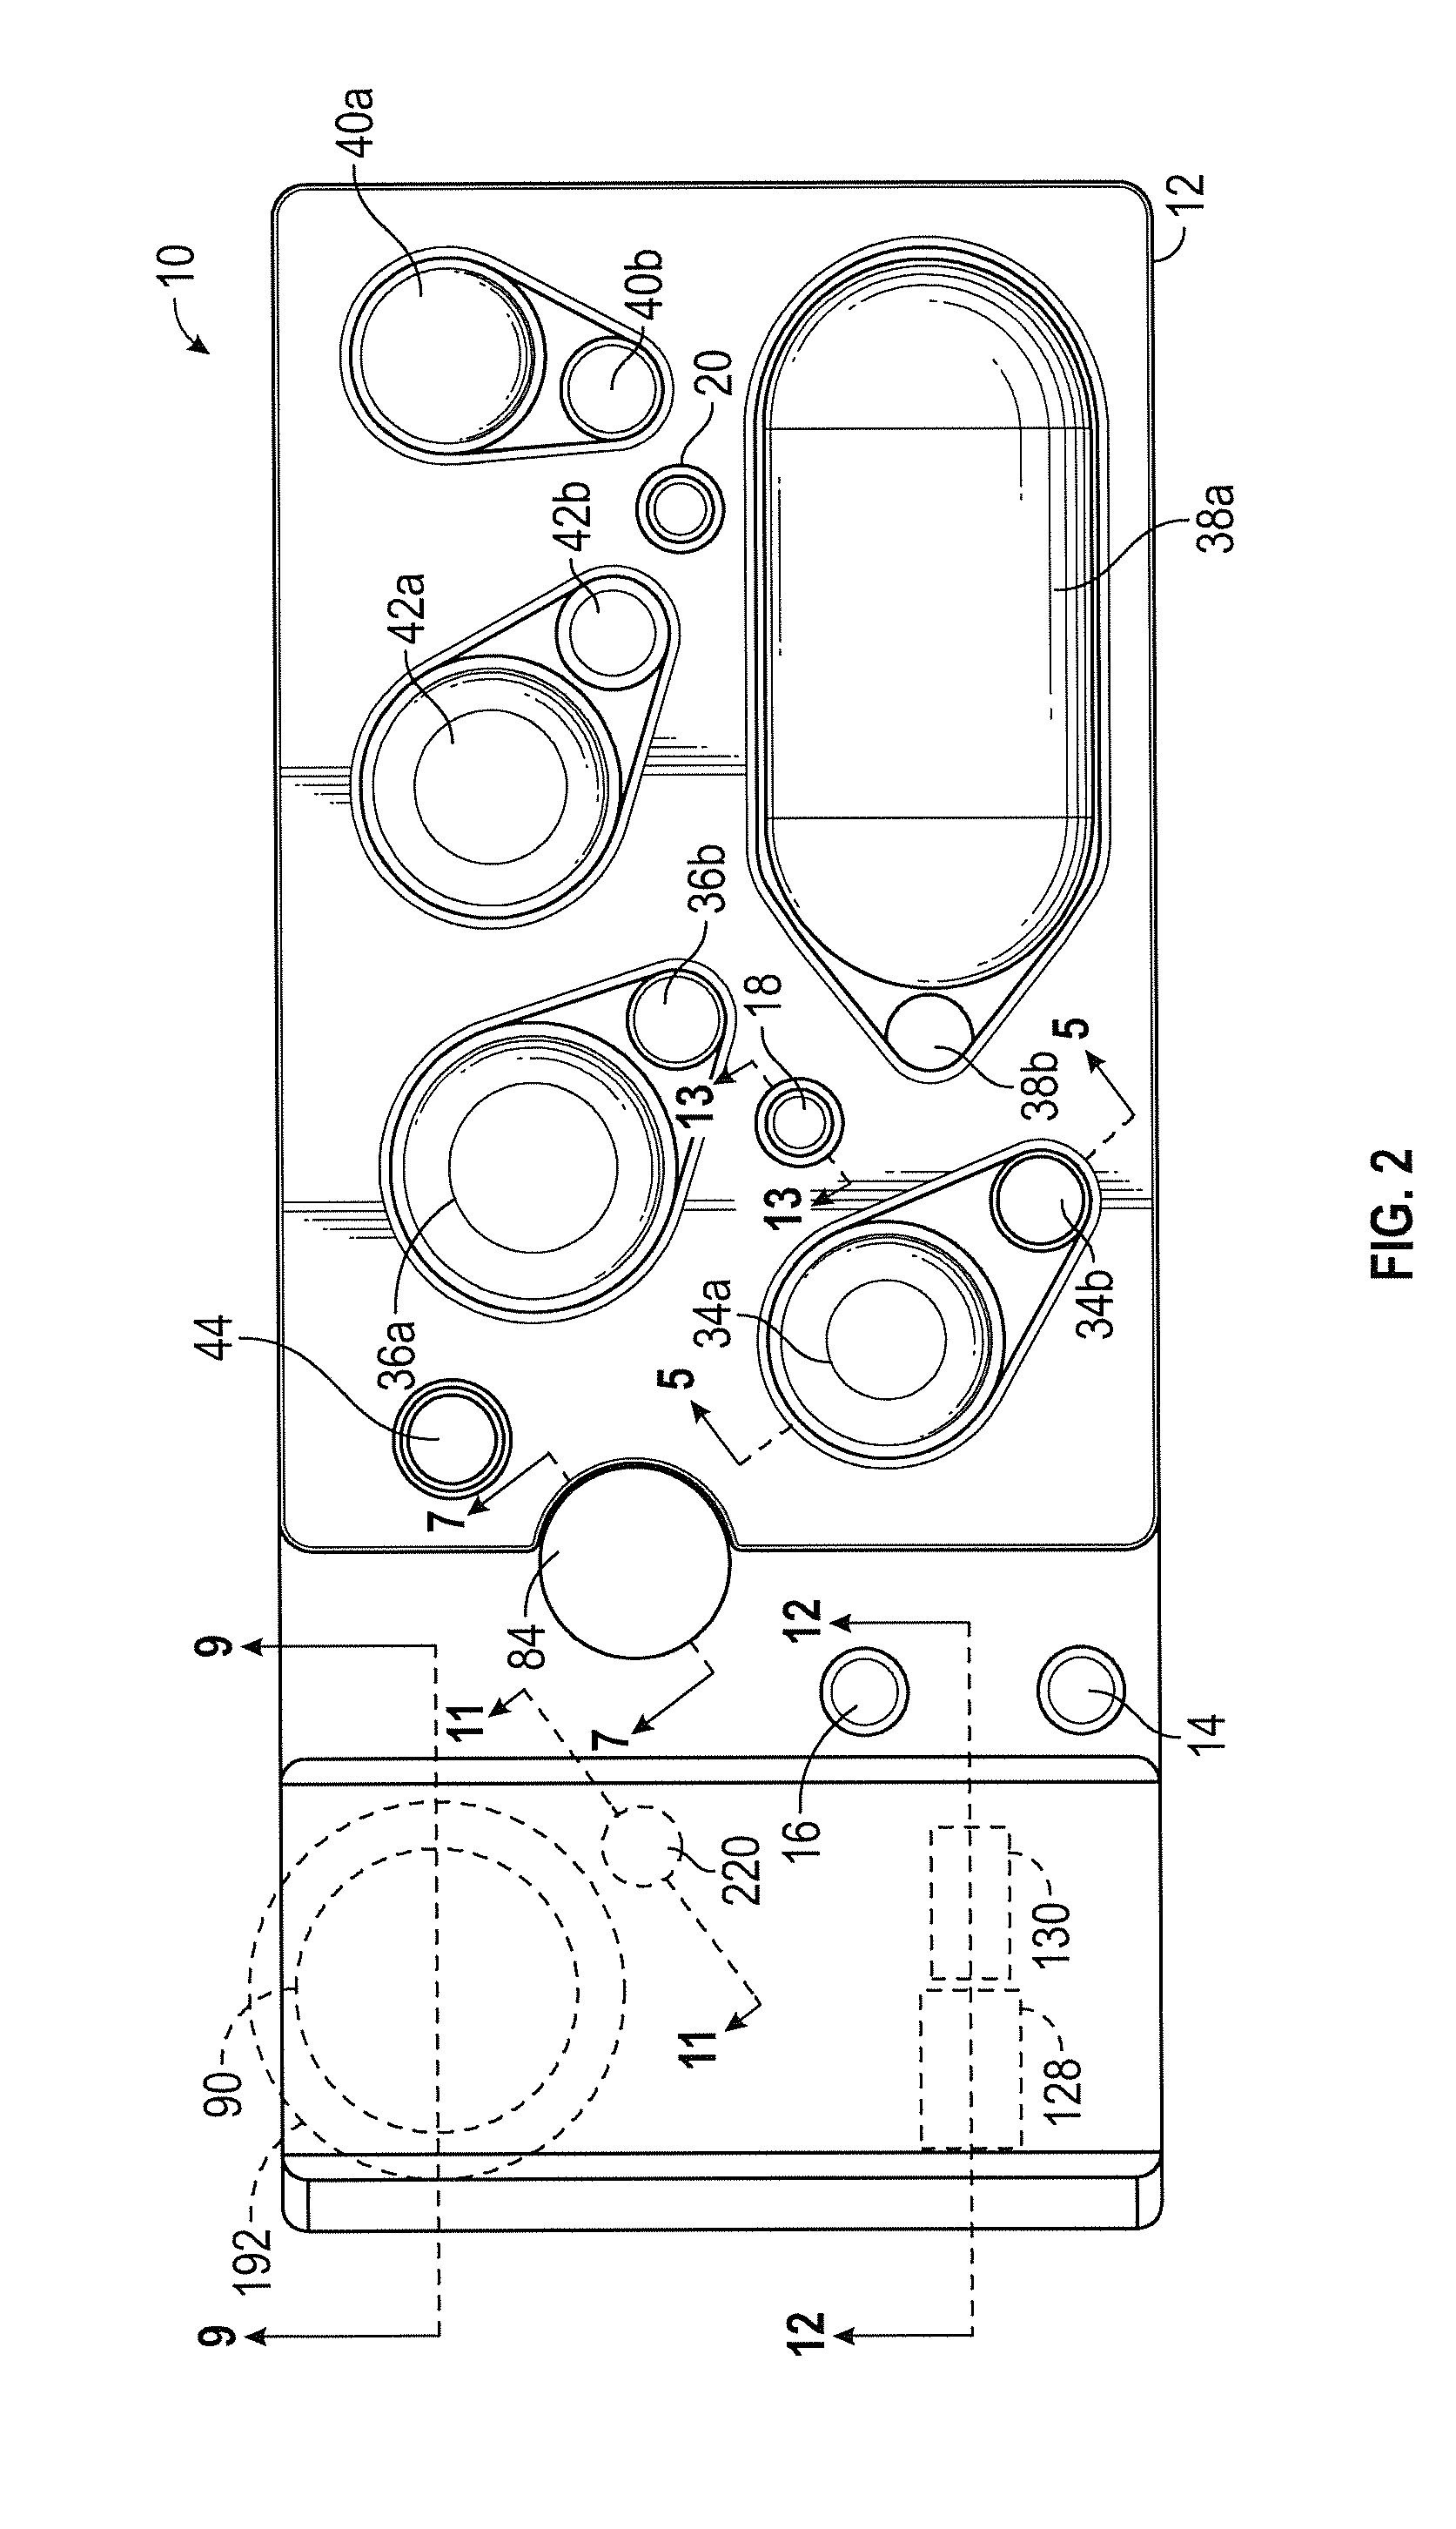 Cartridge for performing assays in a closed sample preparation and reaction system